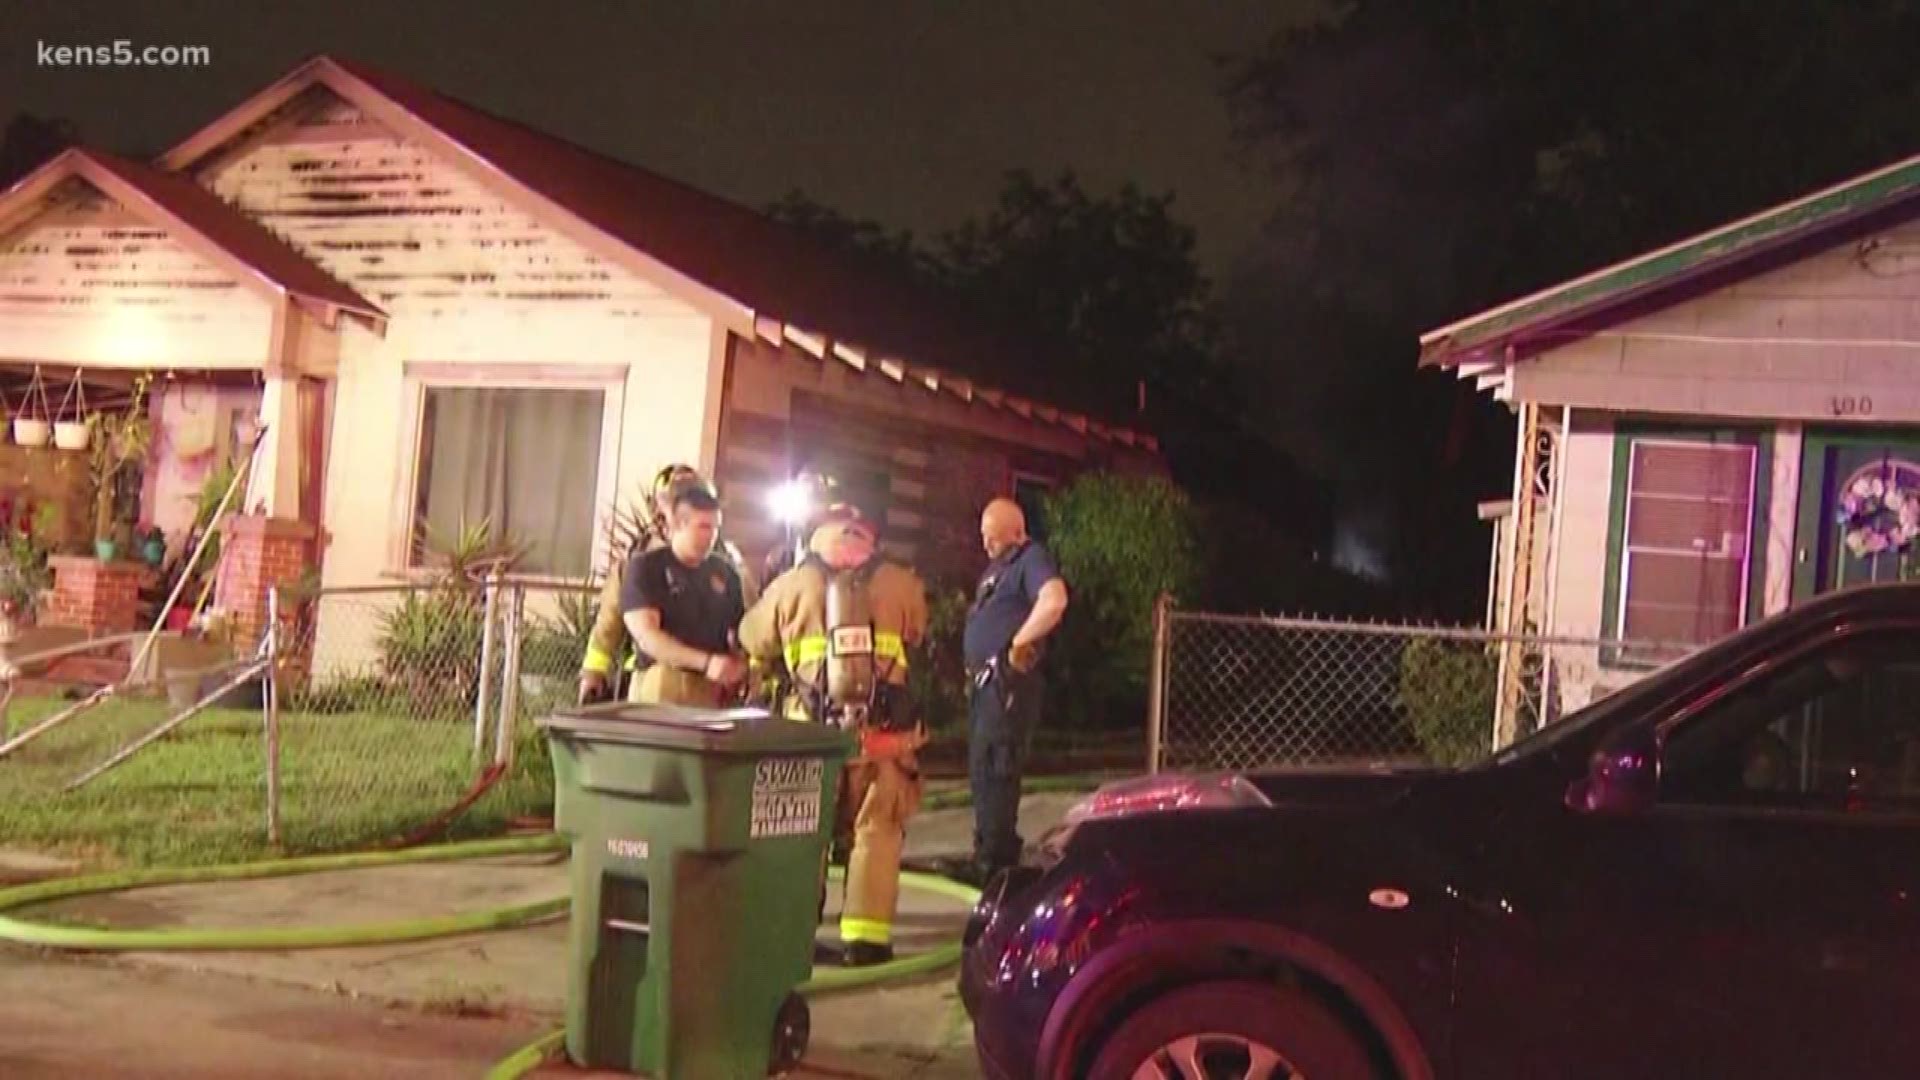 Fire crews say a water heater is to blame for a house fire on the south side early Wednesday morning.